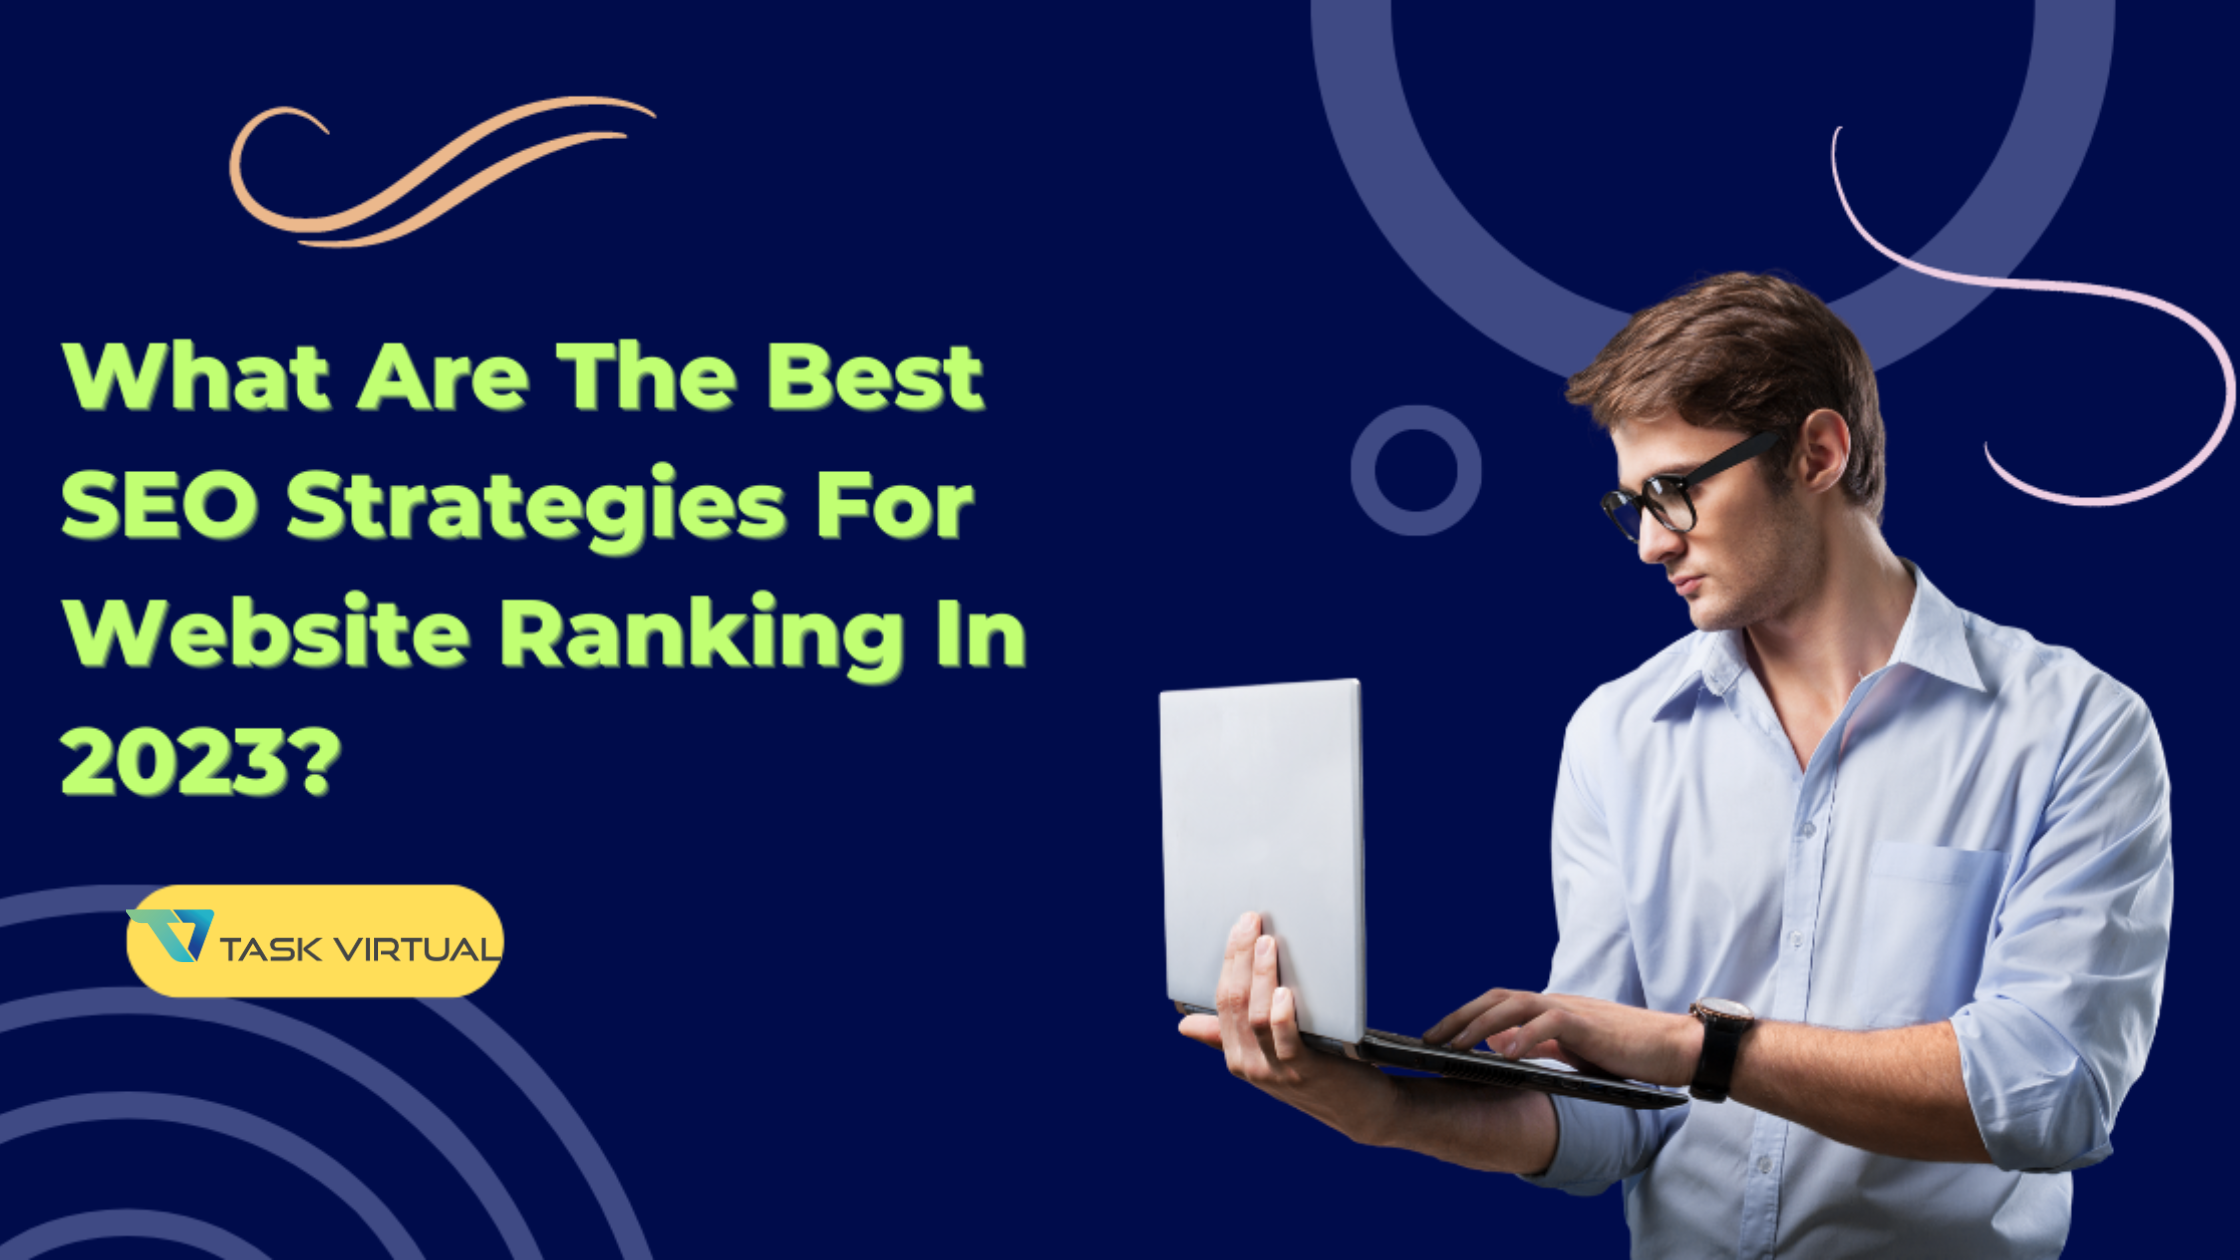 How To Improve SEO Ranking In 2023 